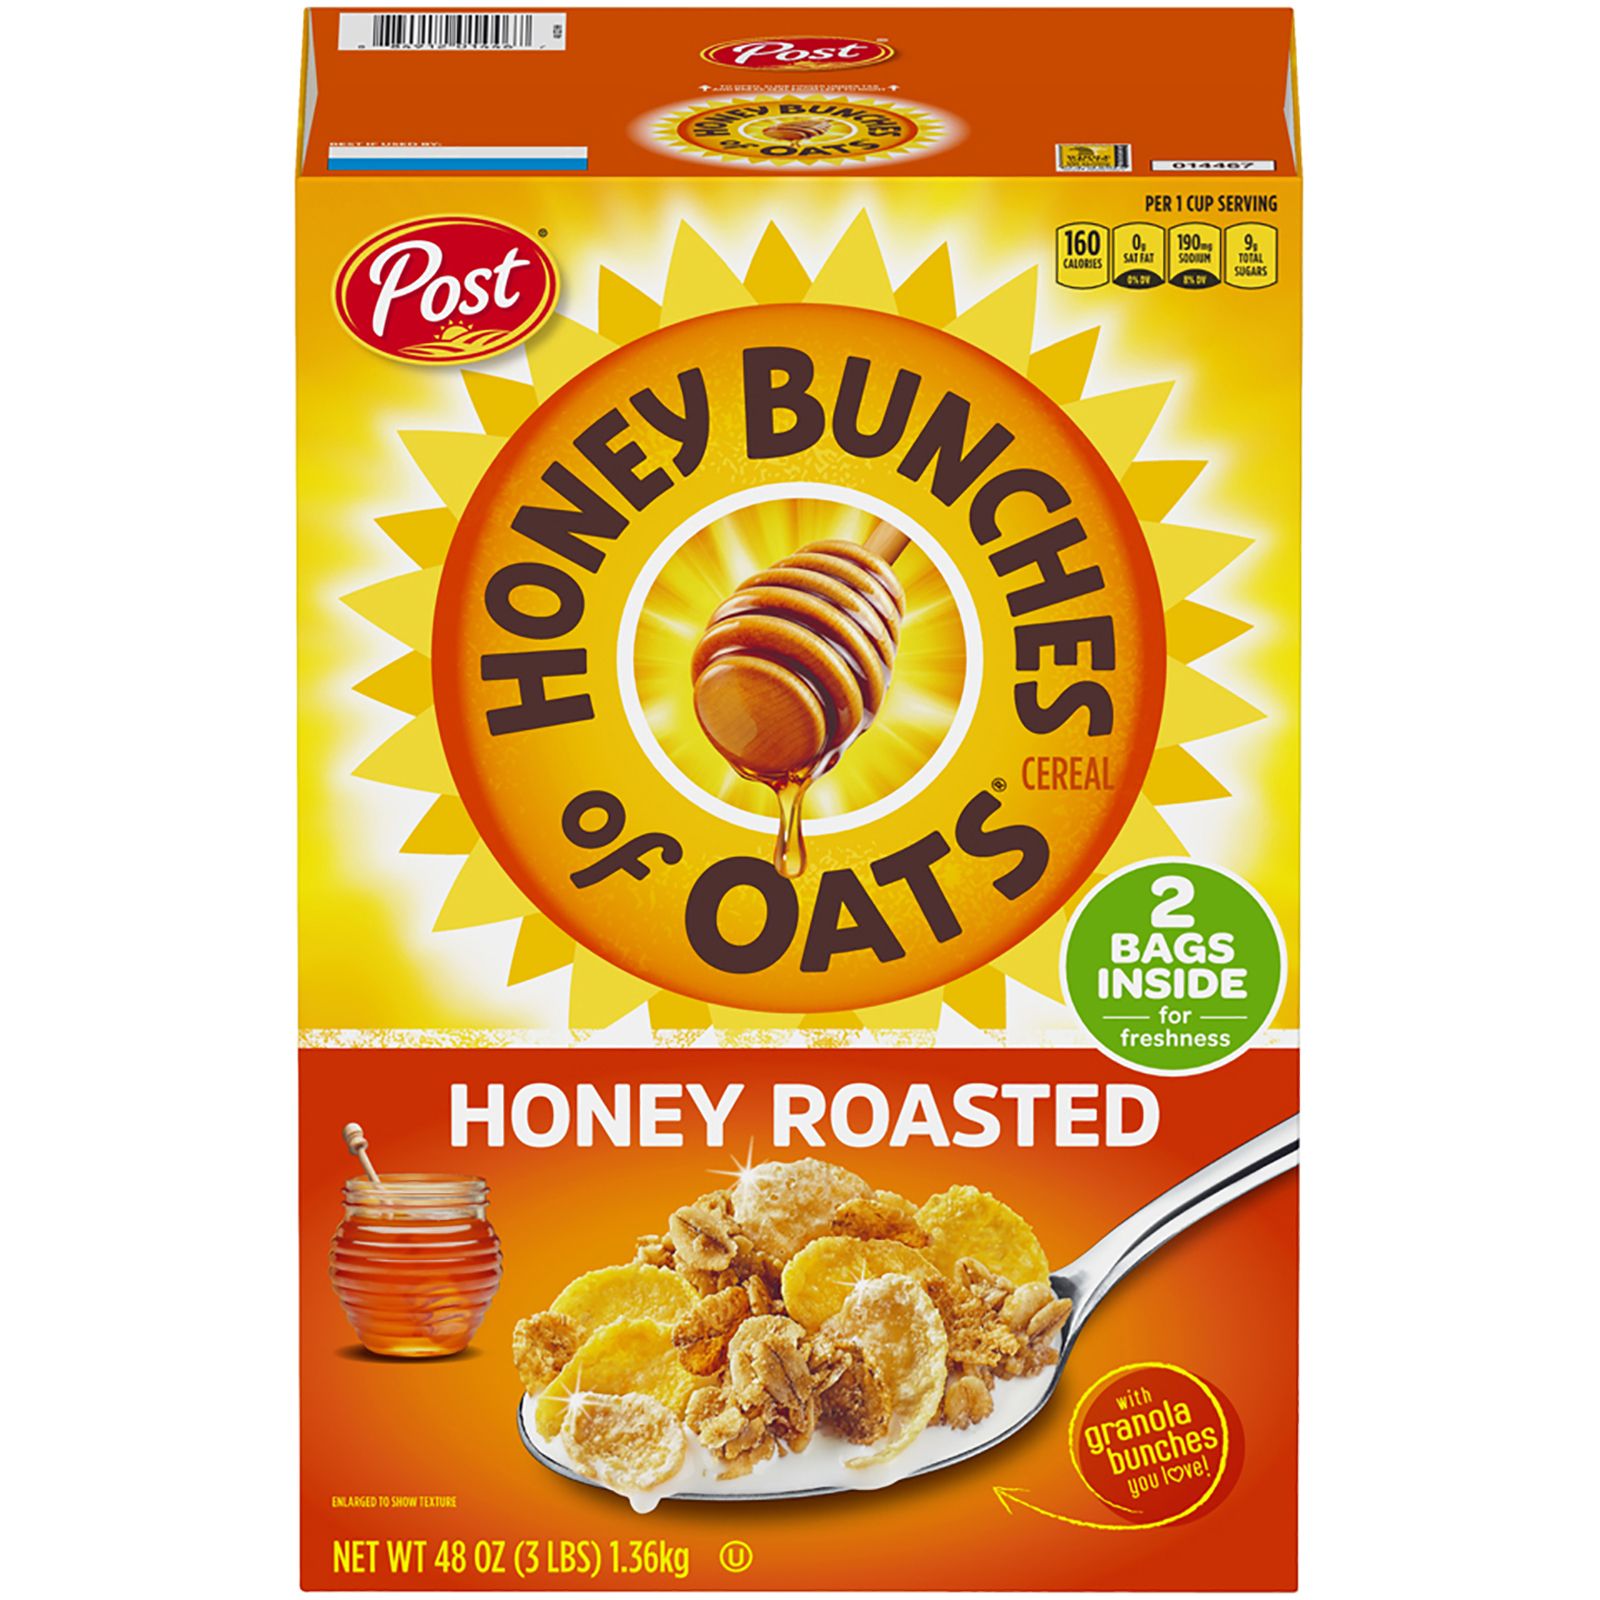 Post Honey Bunches of Oats Honey Roasted, 48 oz.